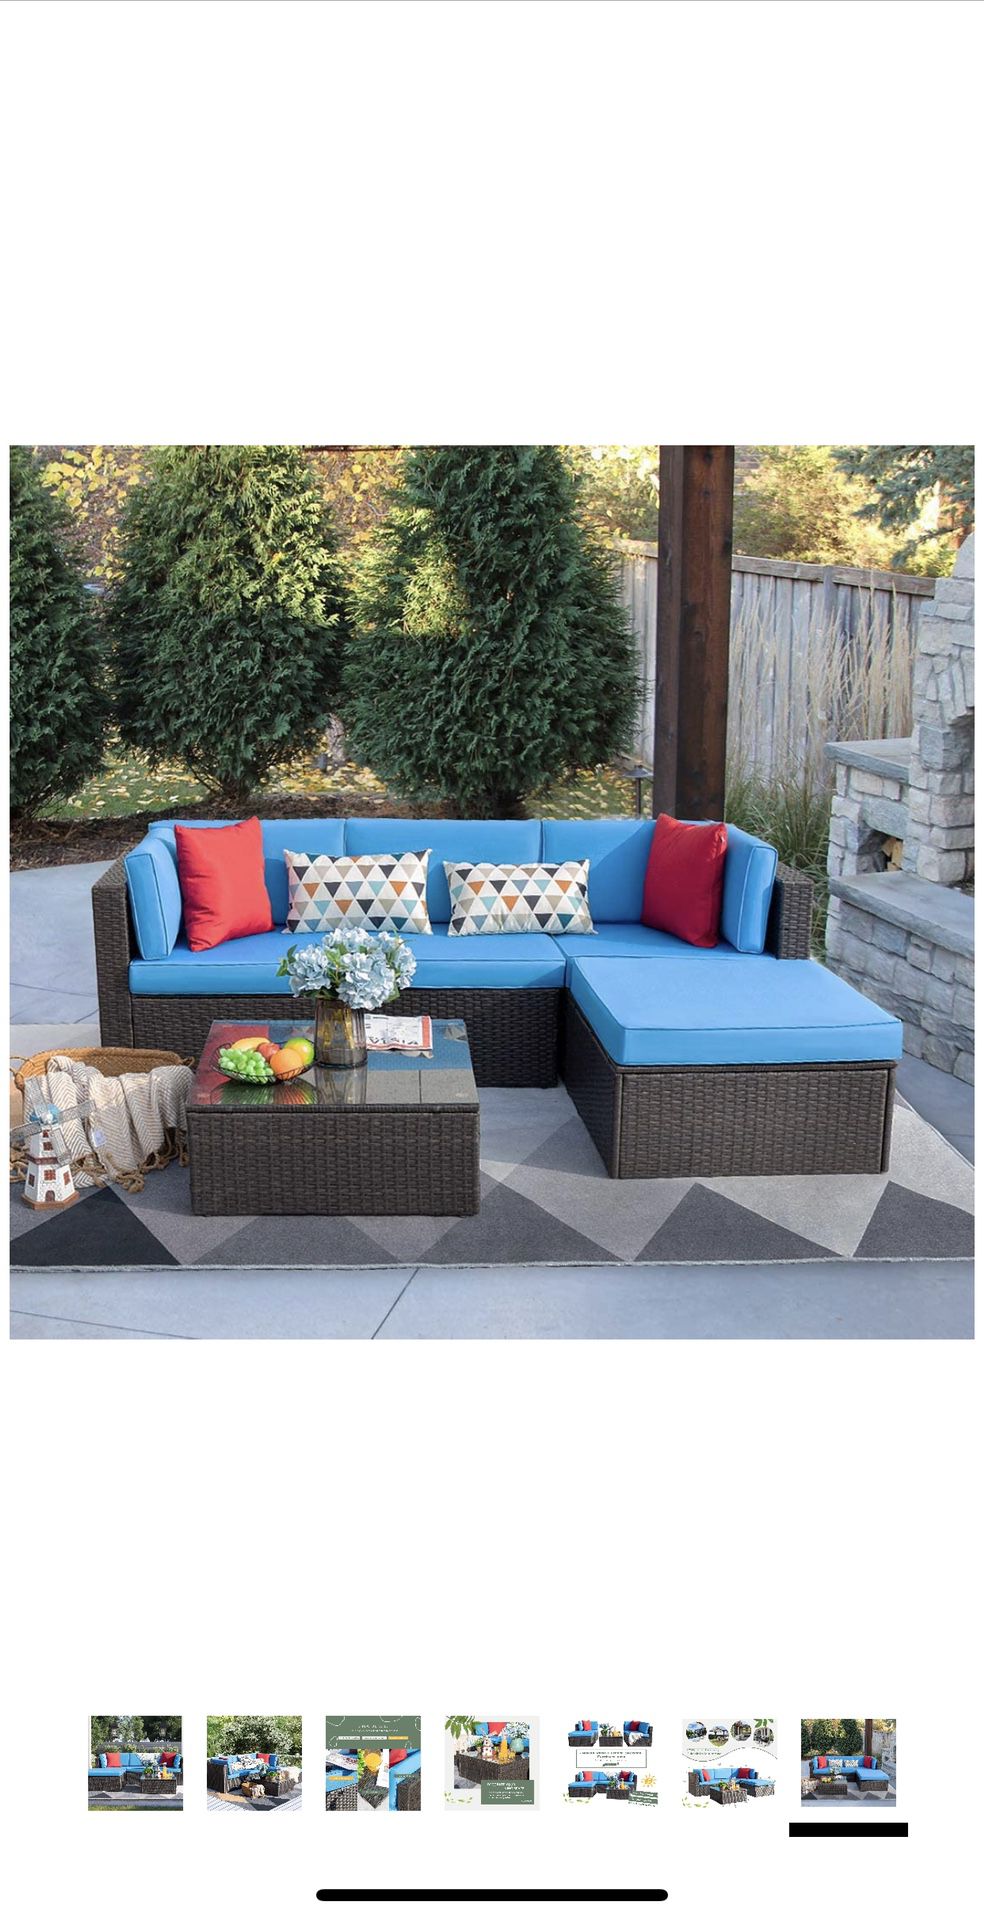 Brand New 5 Pieces Patio Furniture Sets All-Weather Outdoor Sectional Sofa Manual Weaving Wicker Rattan Patio Conversation Set with Cushion and Glass